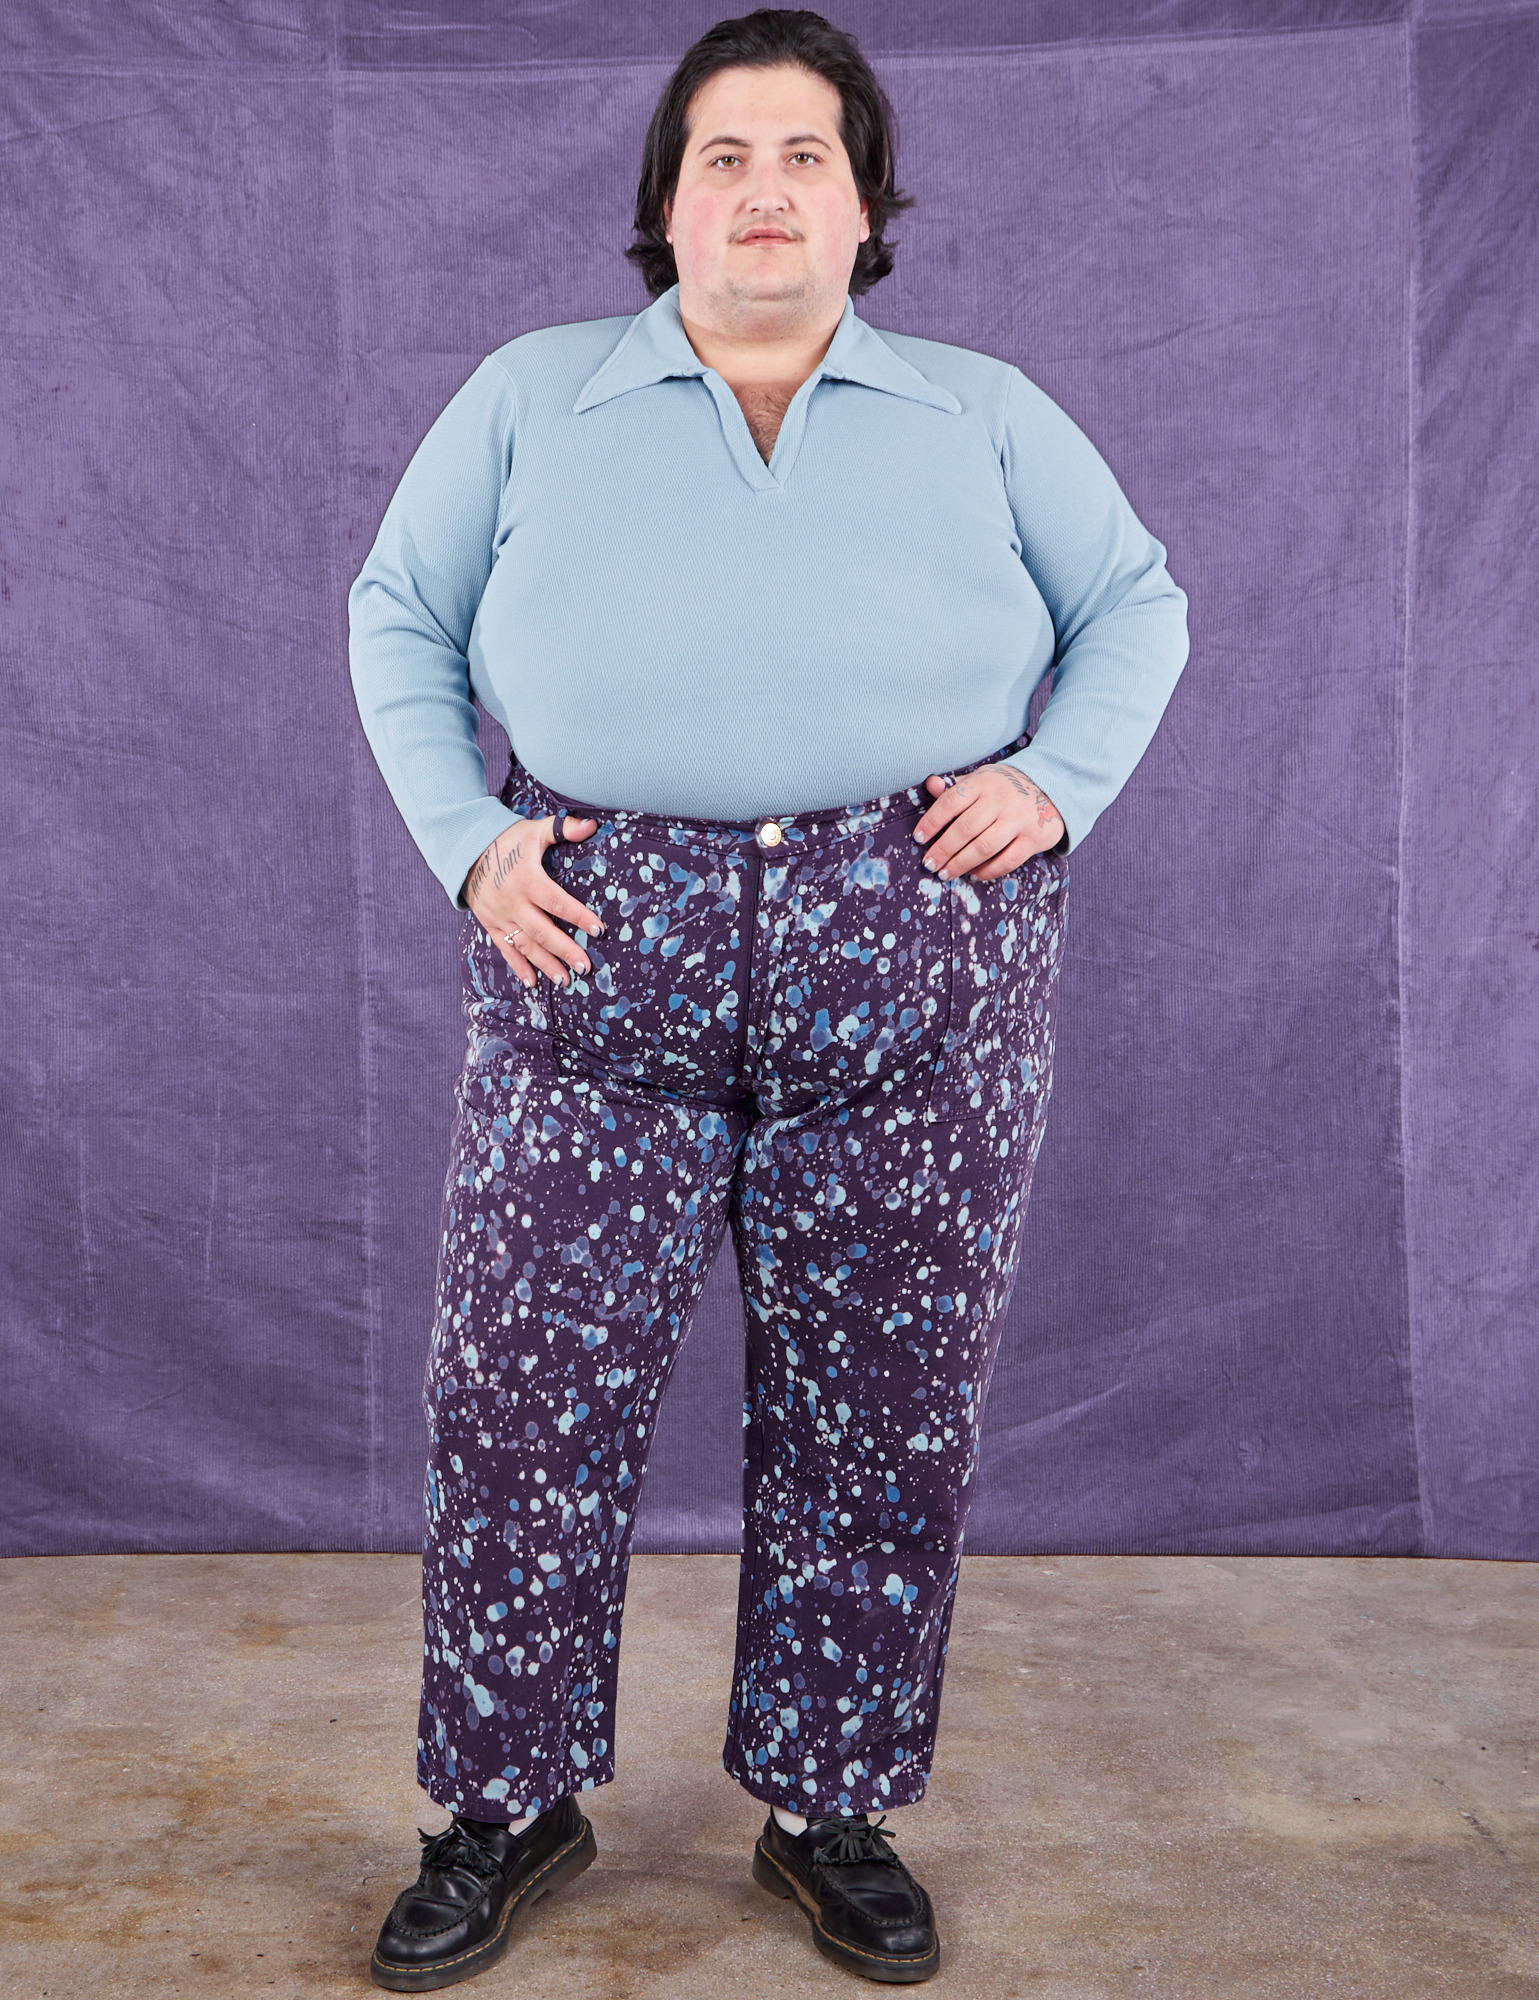 Sam is 5&#39;10&quot; and wearing 3XL Marble Splatter Work Pants in Nebula Purple paired with baby blue Long Sleeve Fisherman Polo